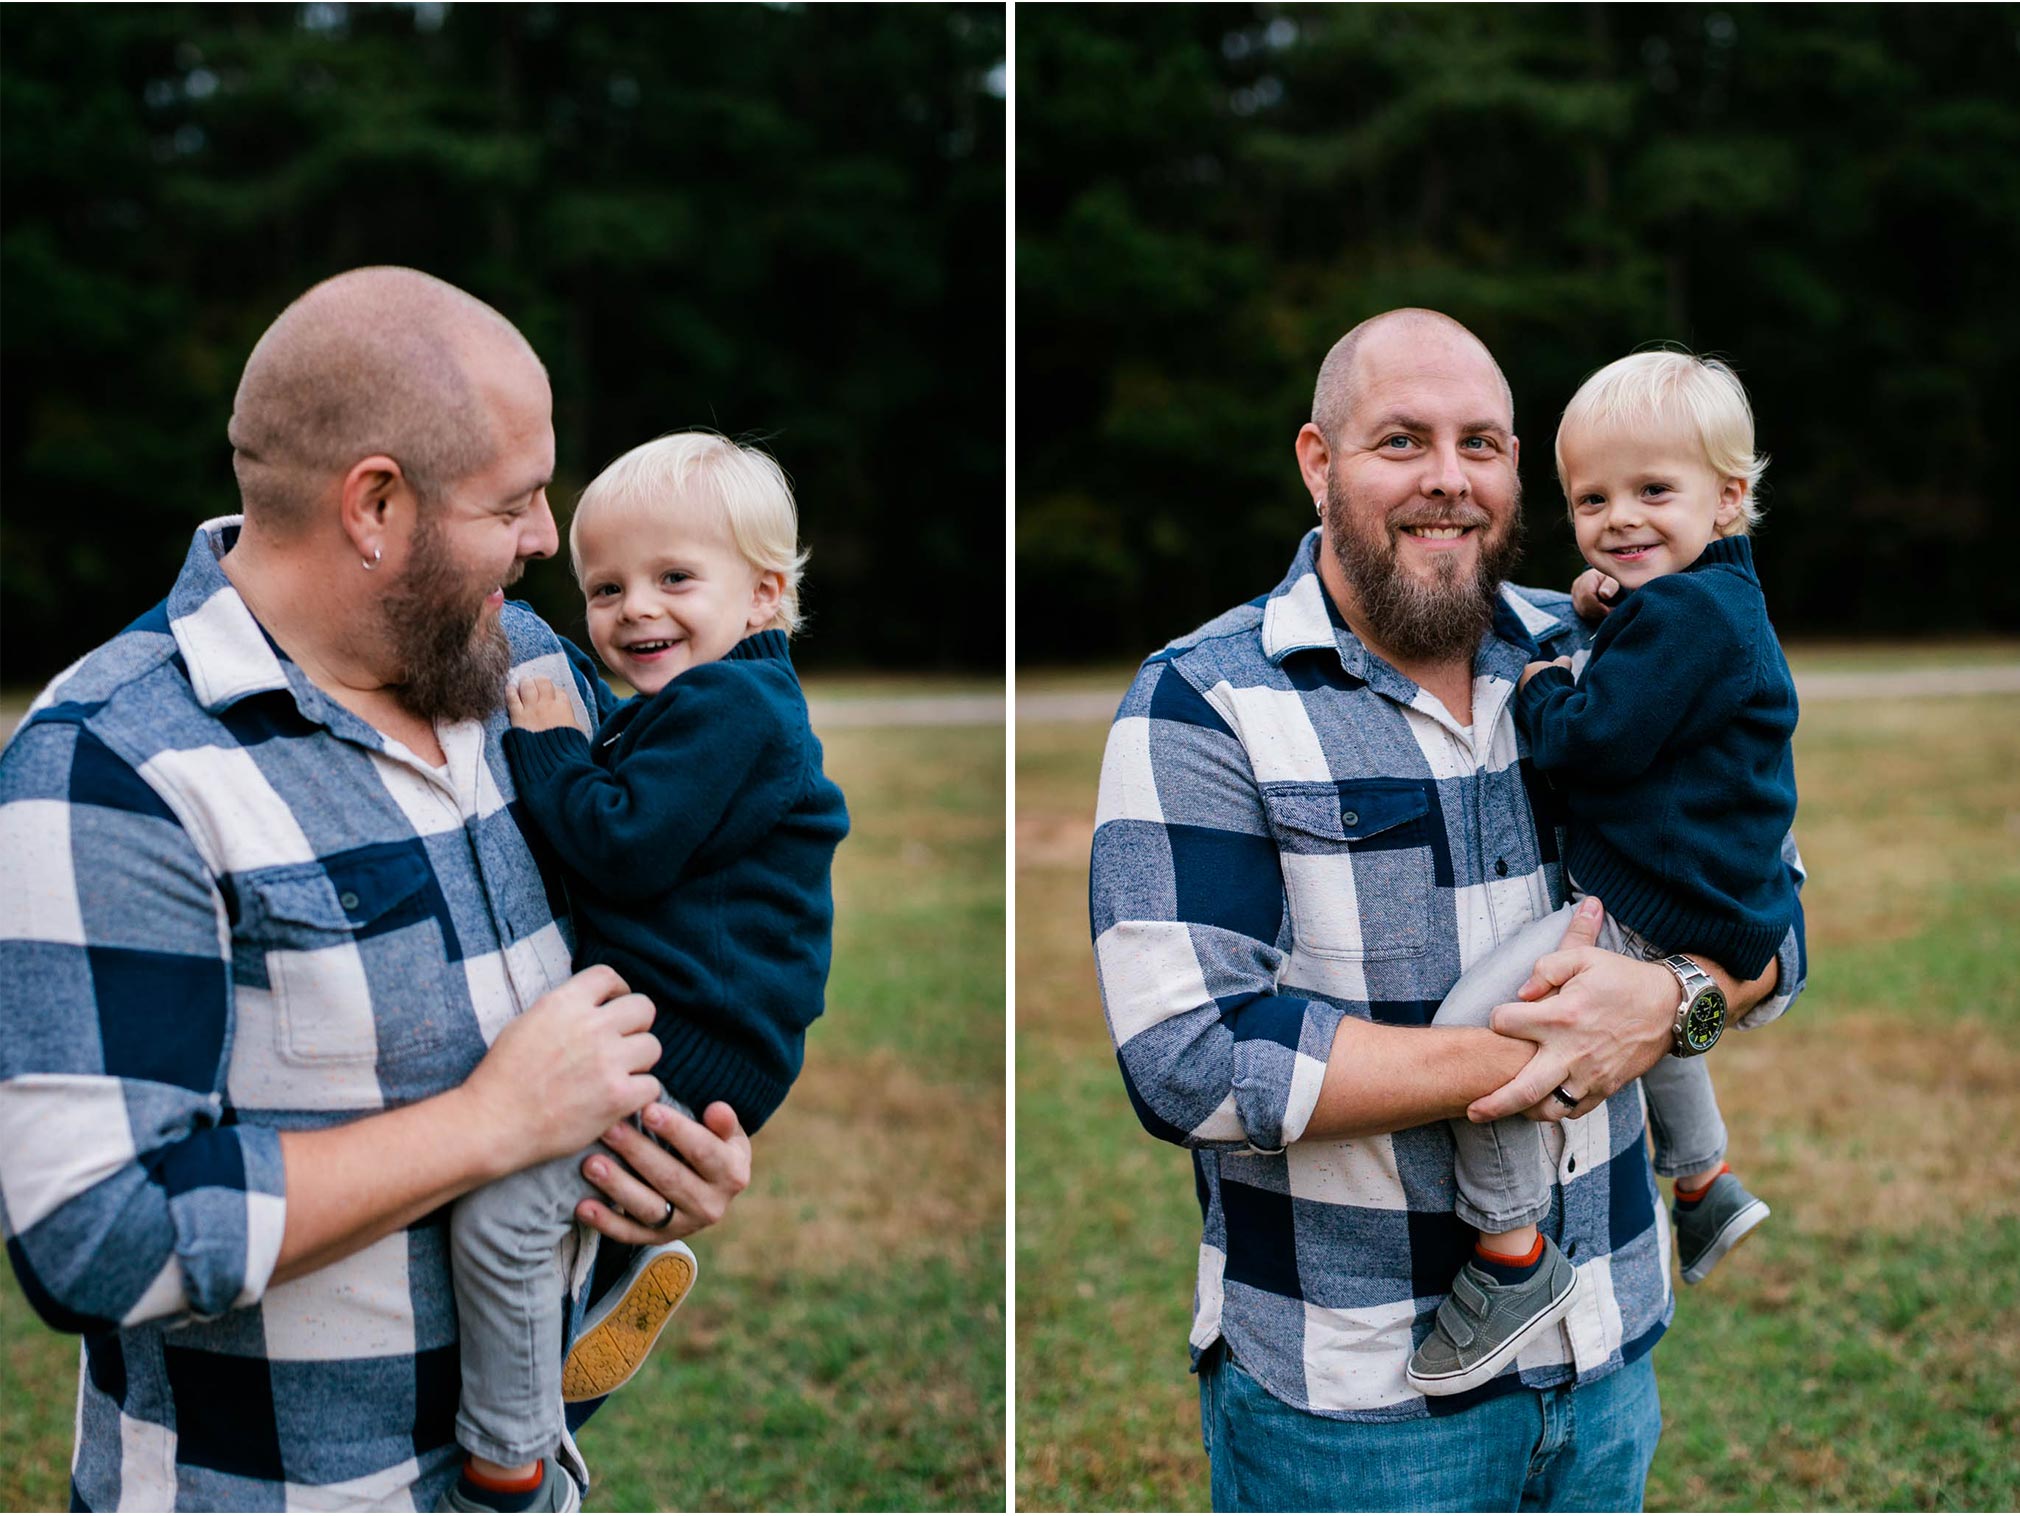 Father and son photo outside at Umstead Park | Raleigh Family Photographer | By G. Lin Photography